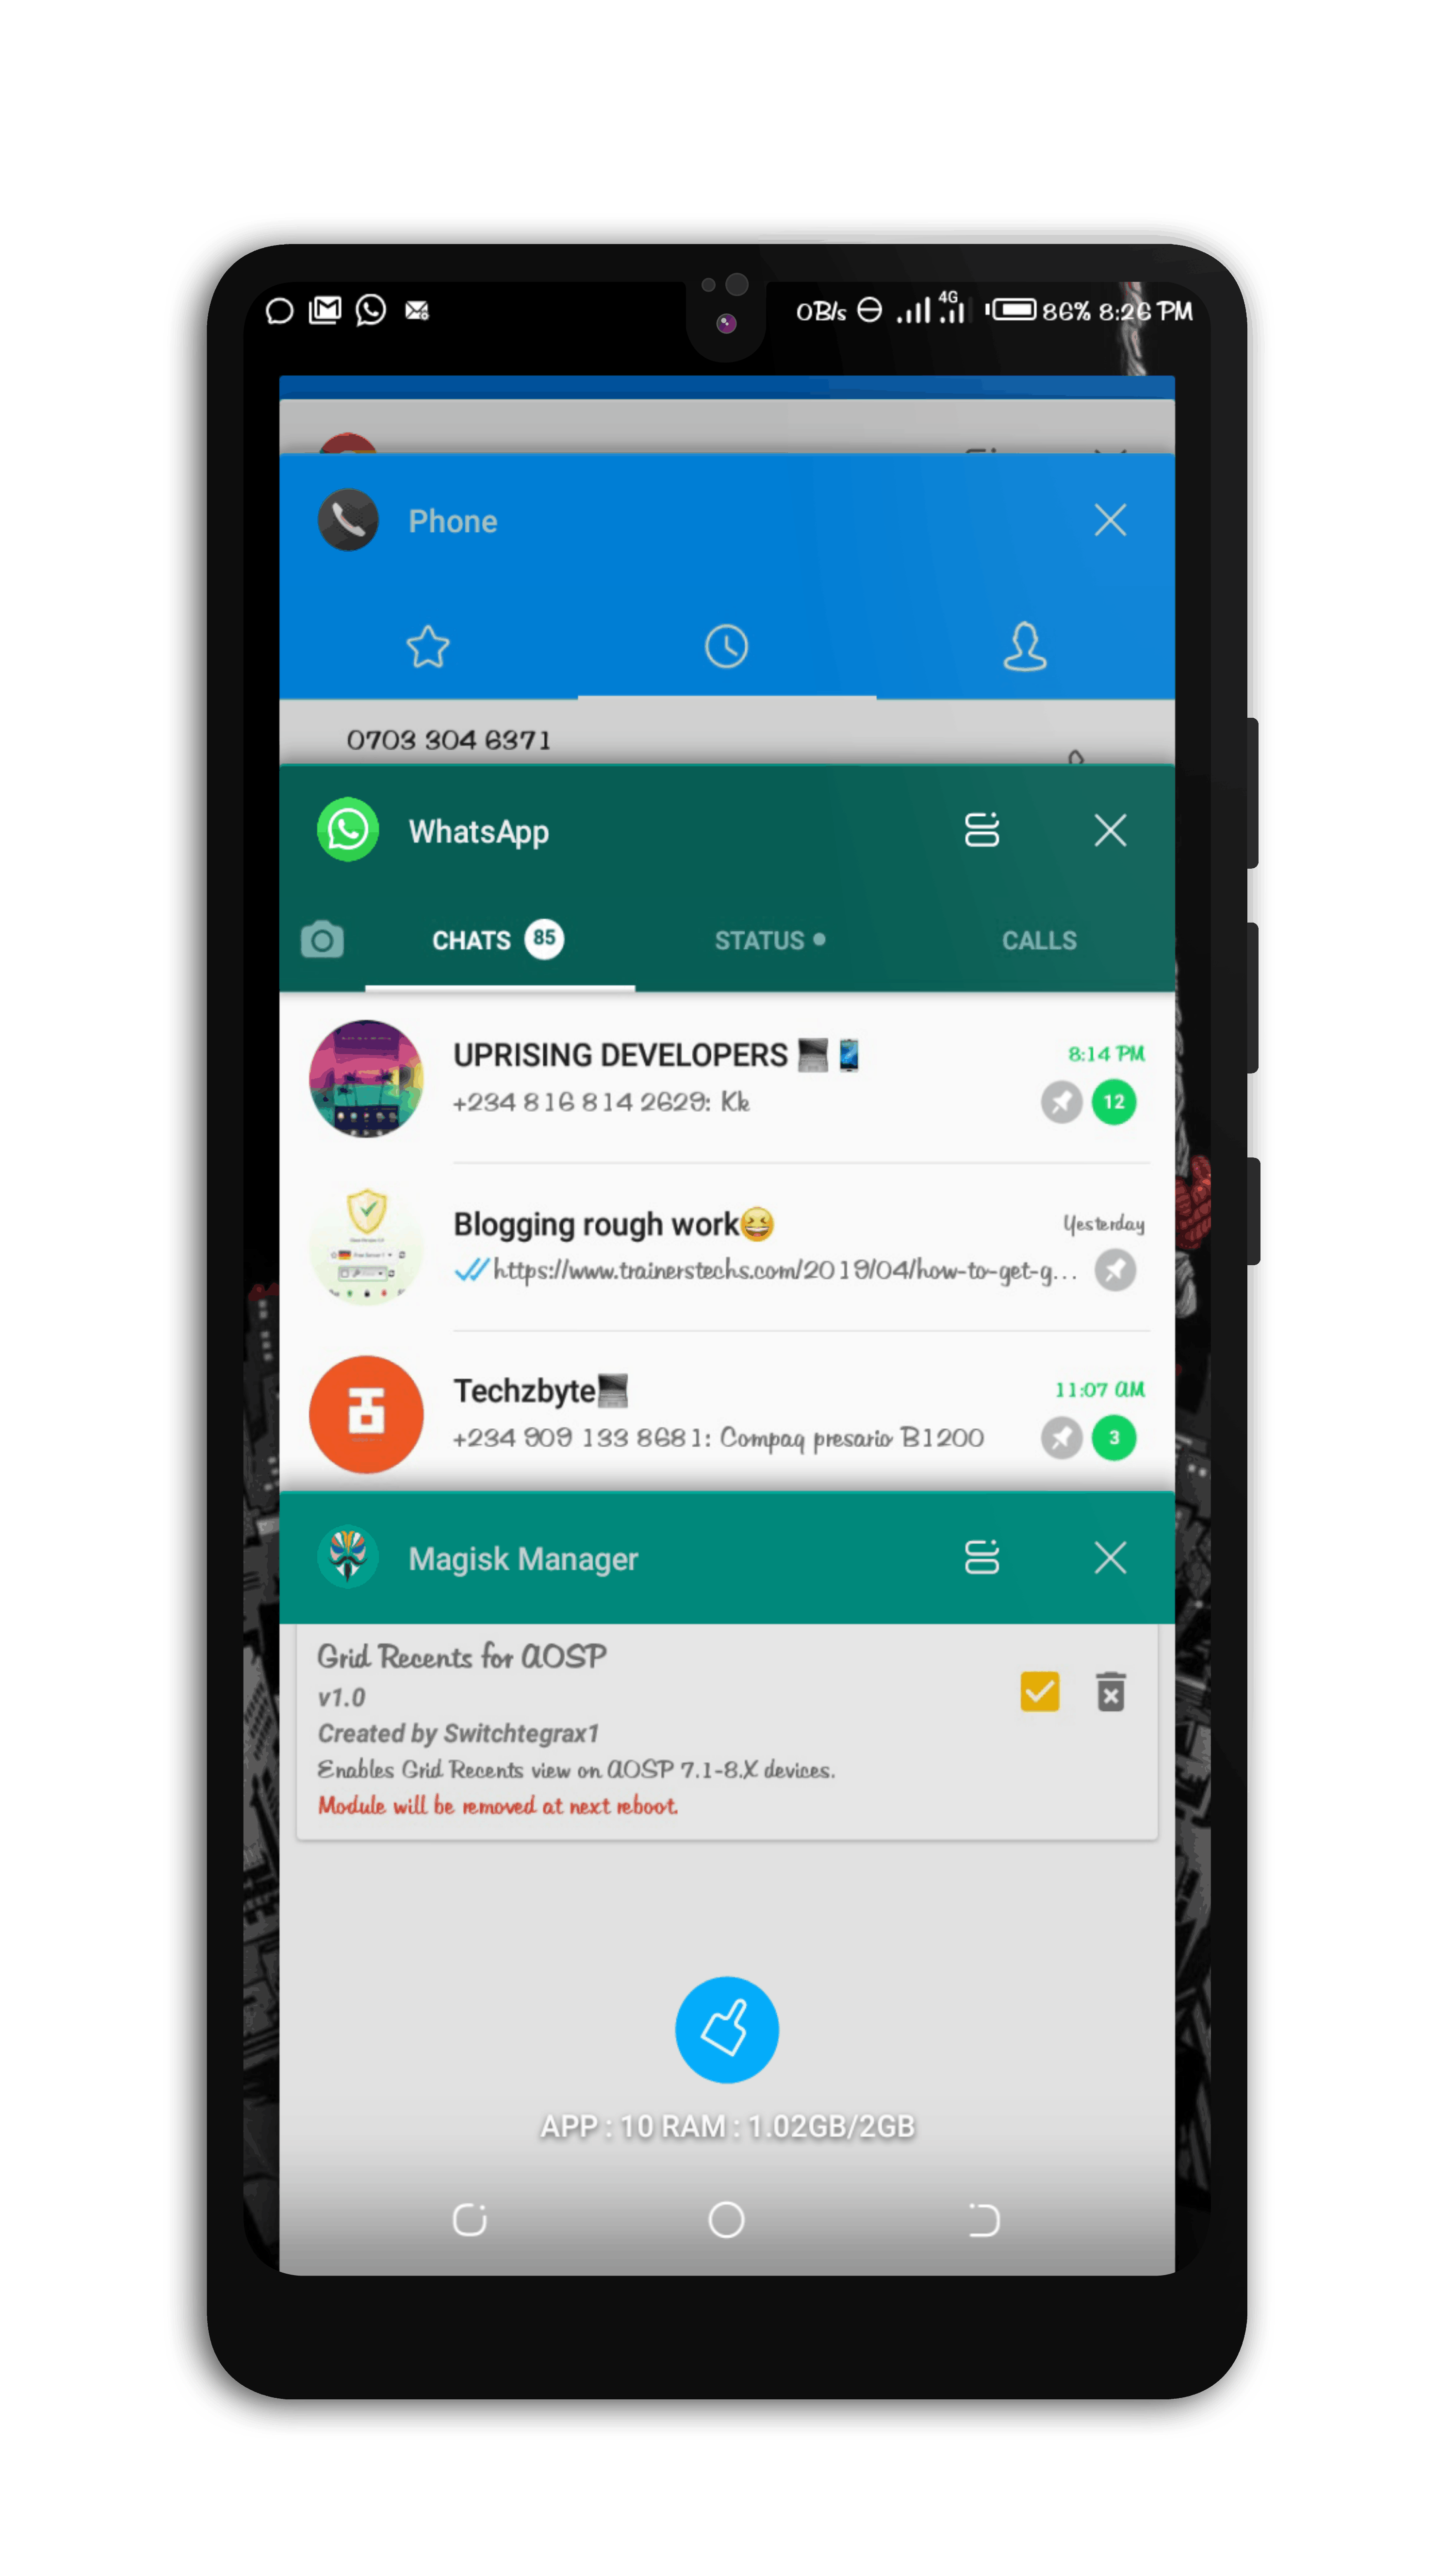 How To Enable Grid Recent Apps On Android Oreo